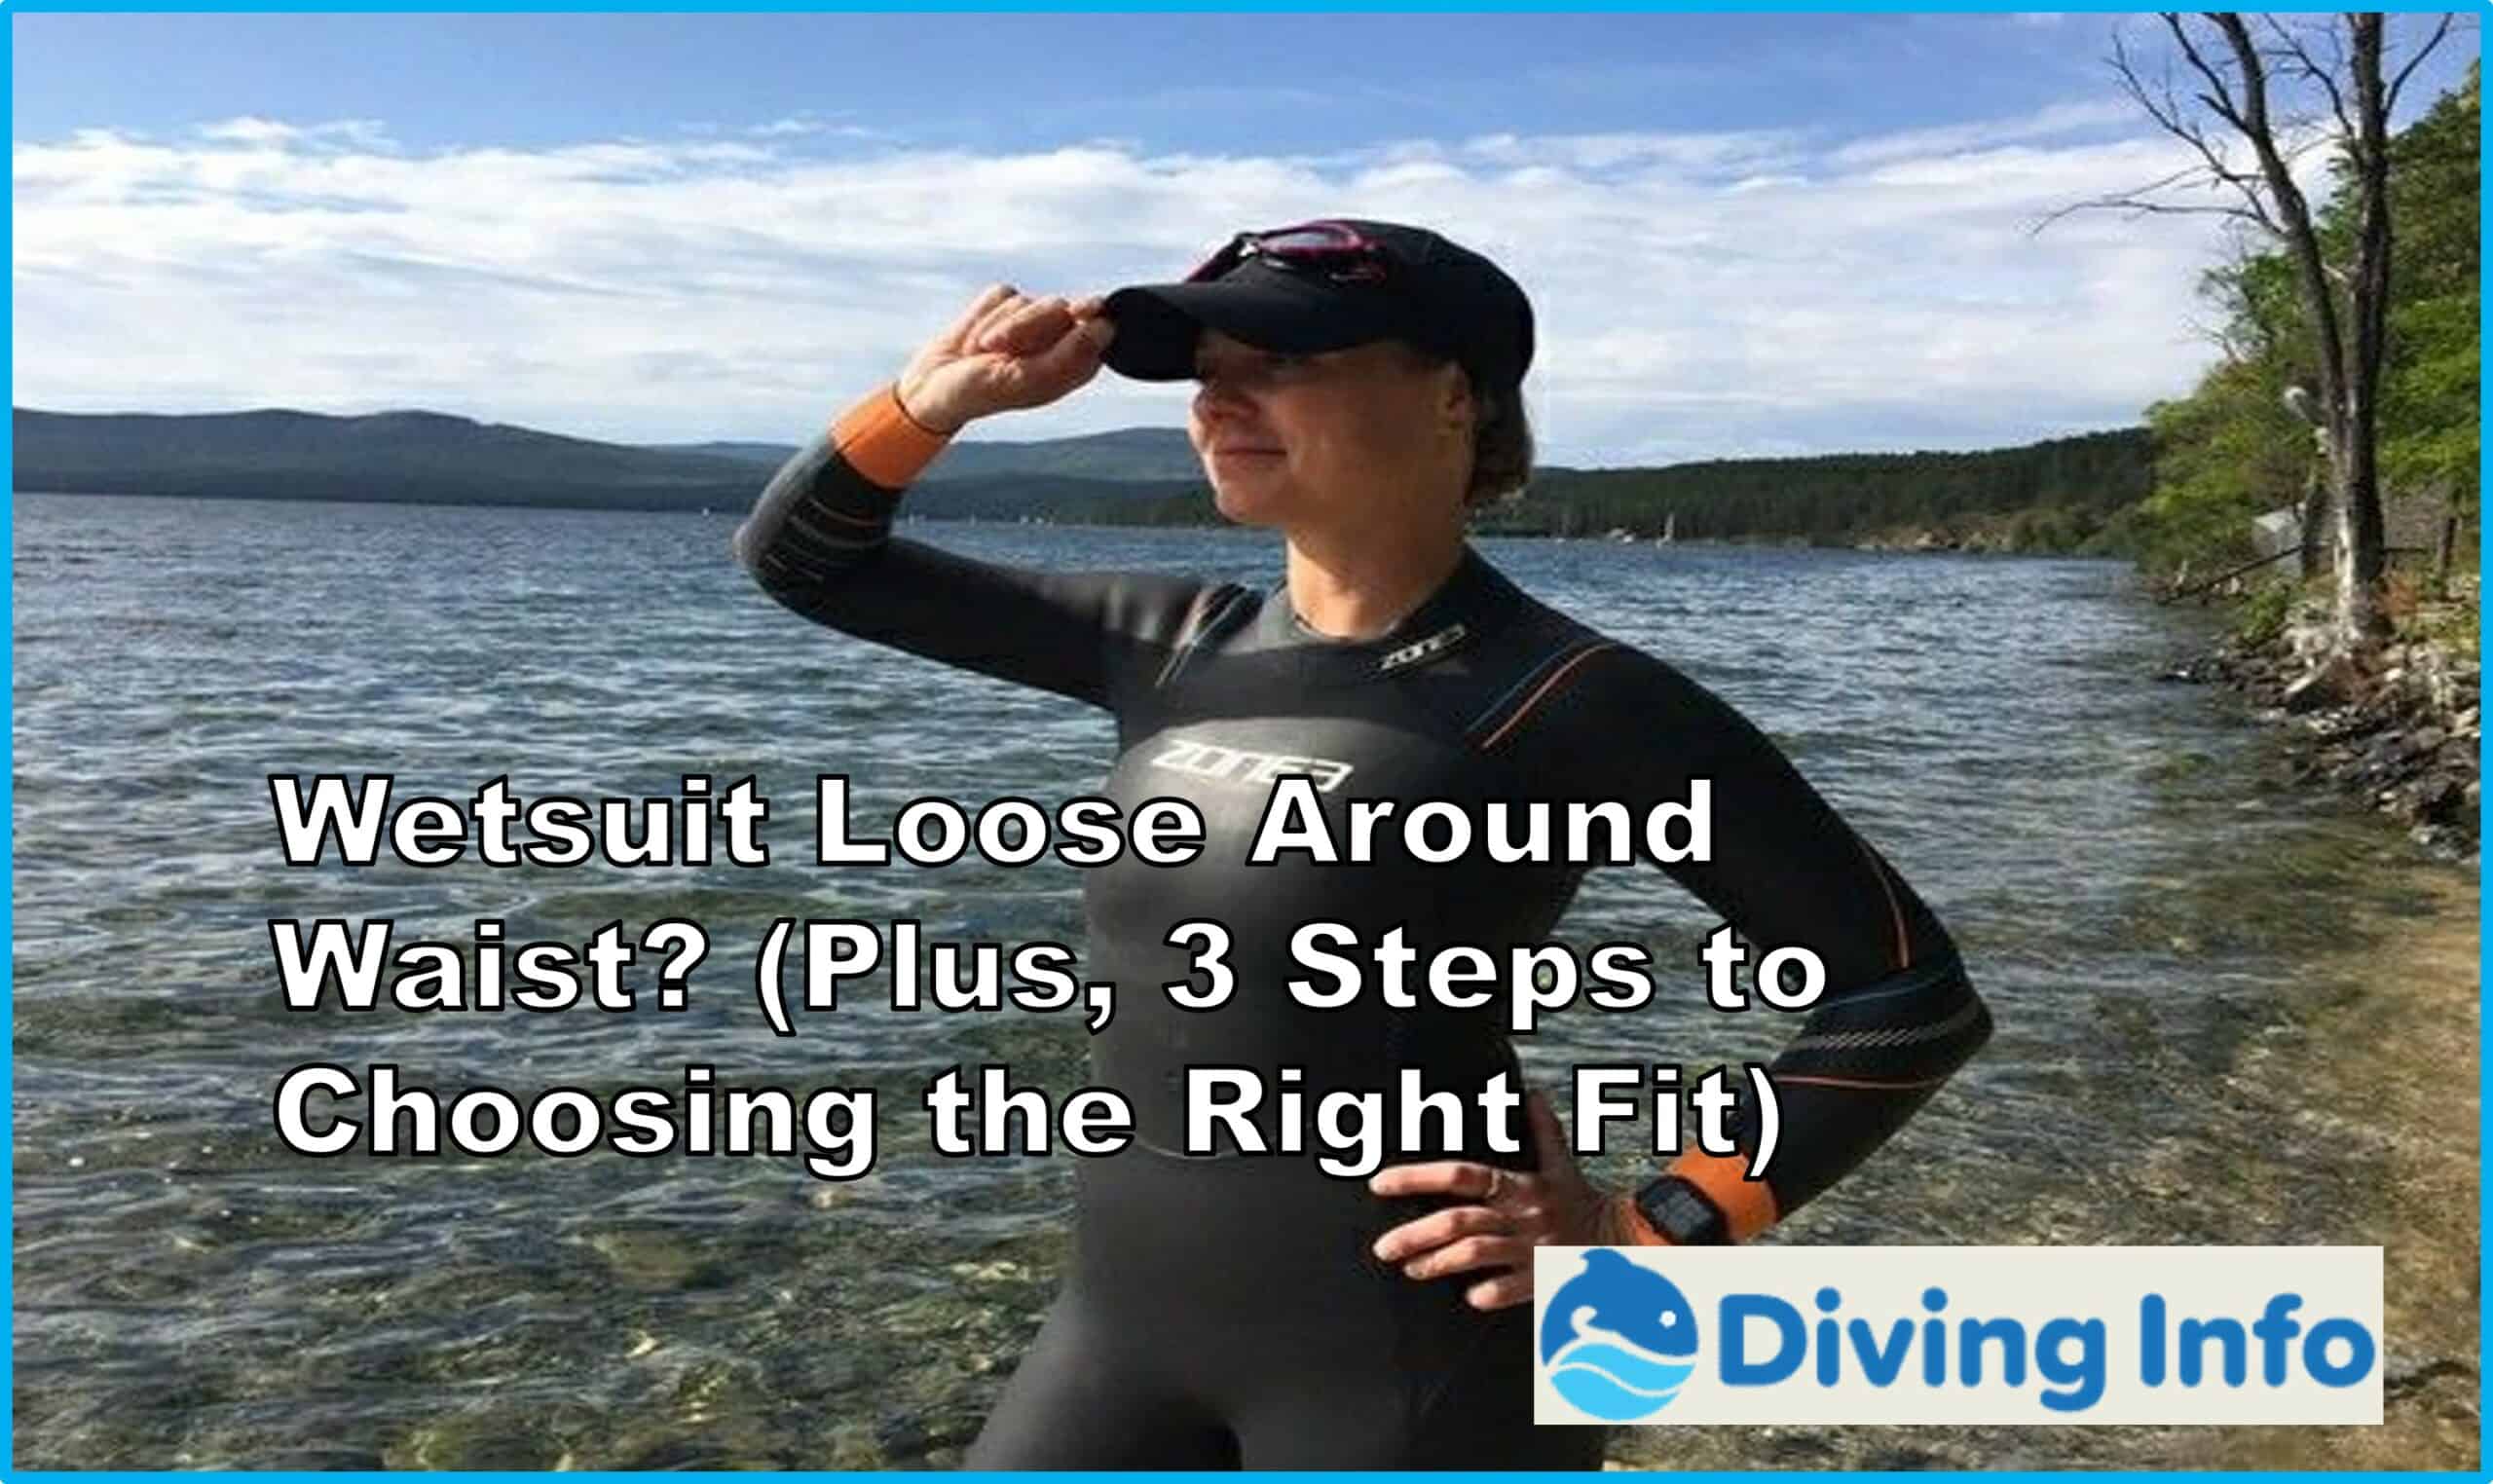 Wetsuit Loose Around Waist? (Plus, 3 Steps to Choosing the Right Fit)